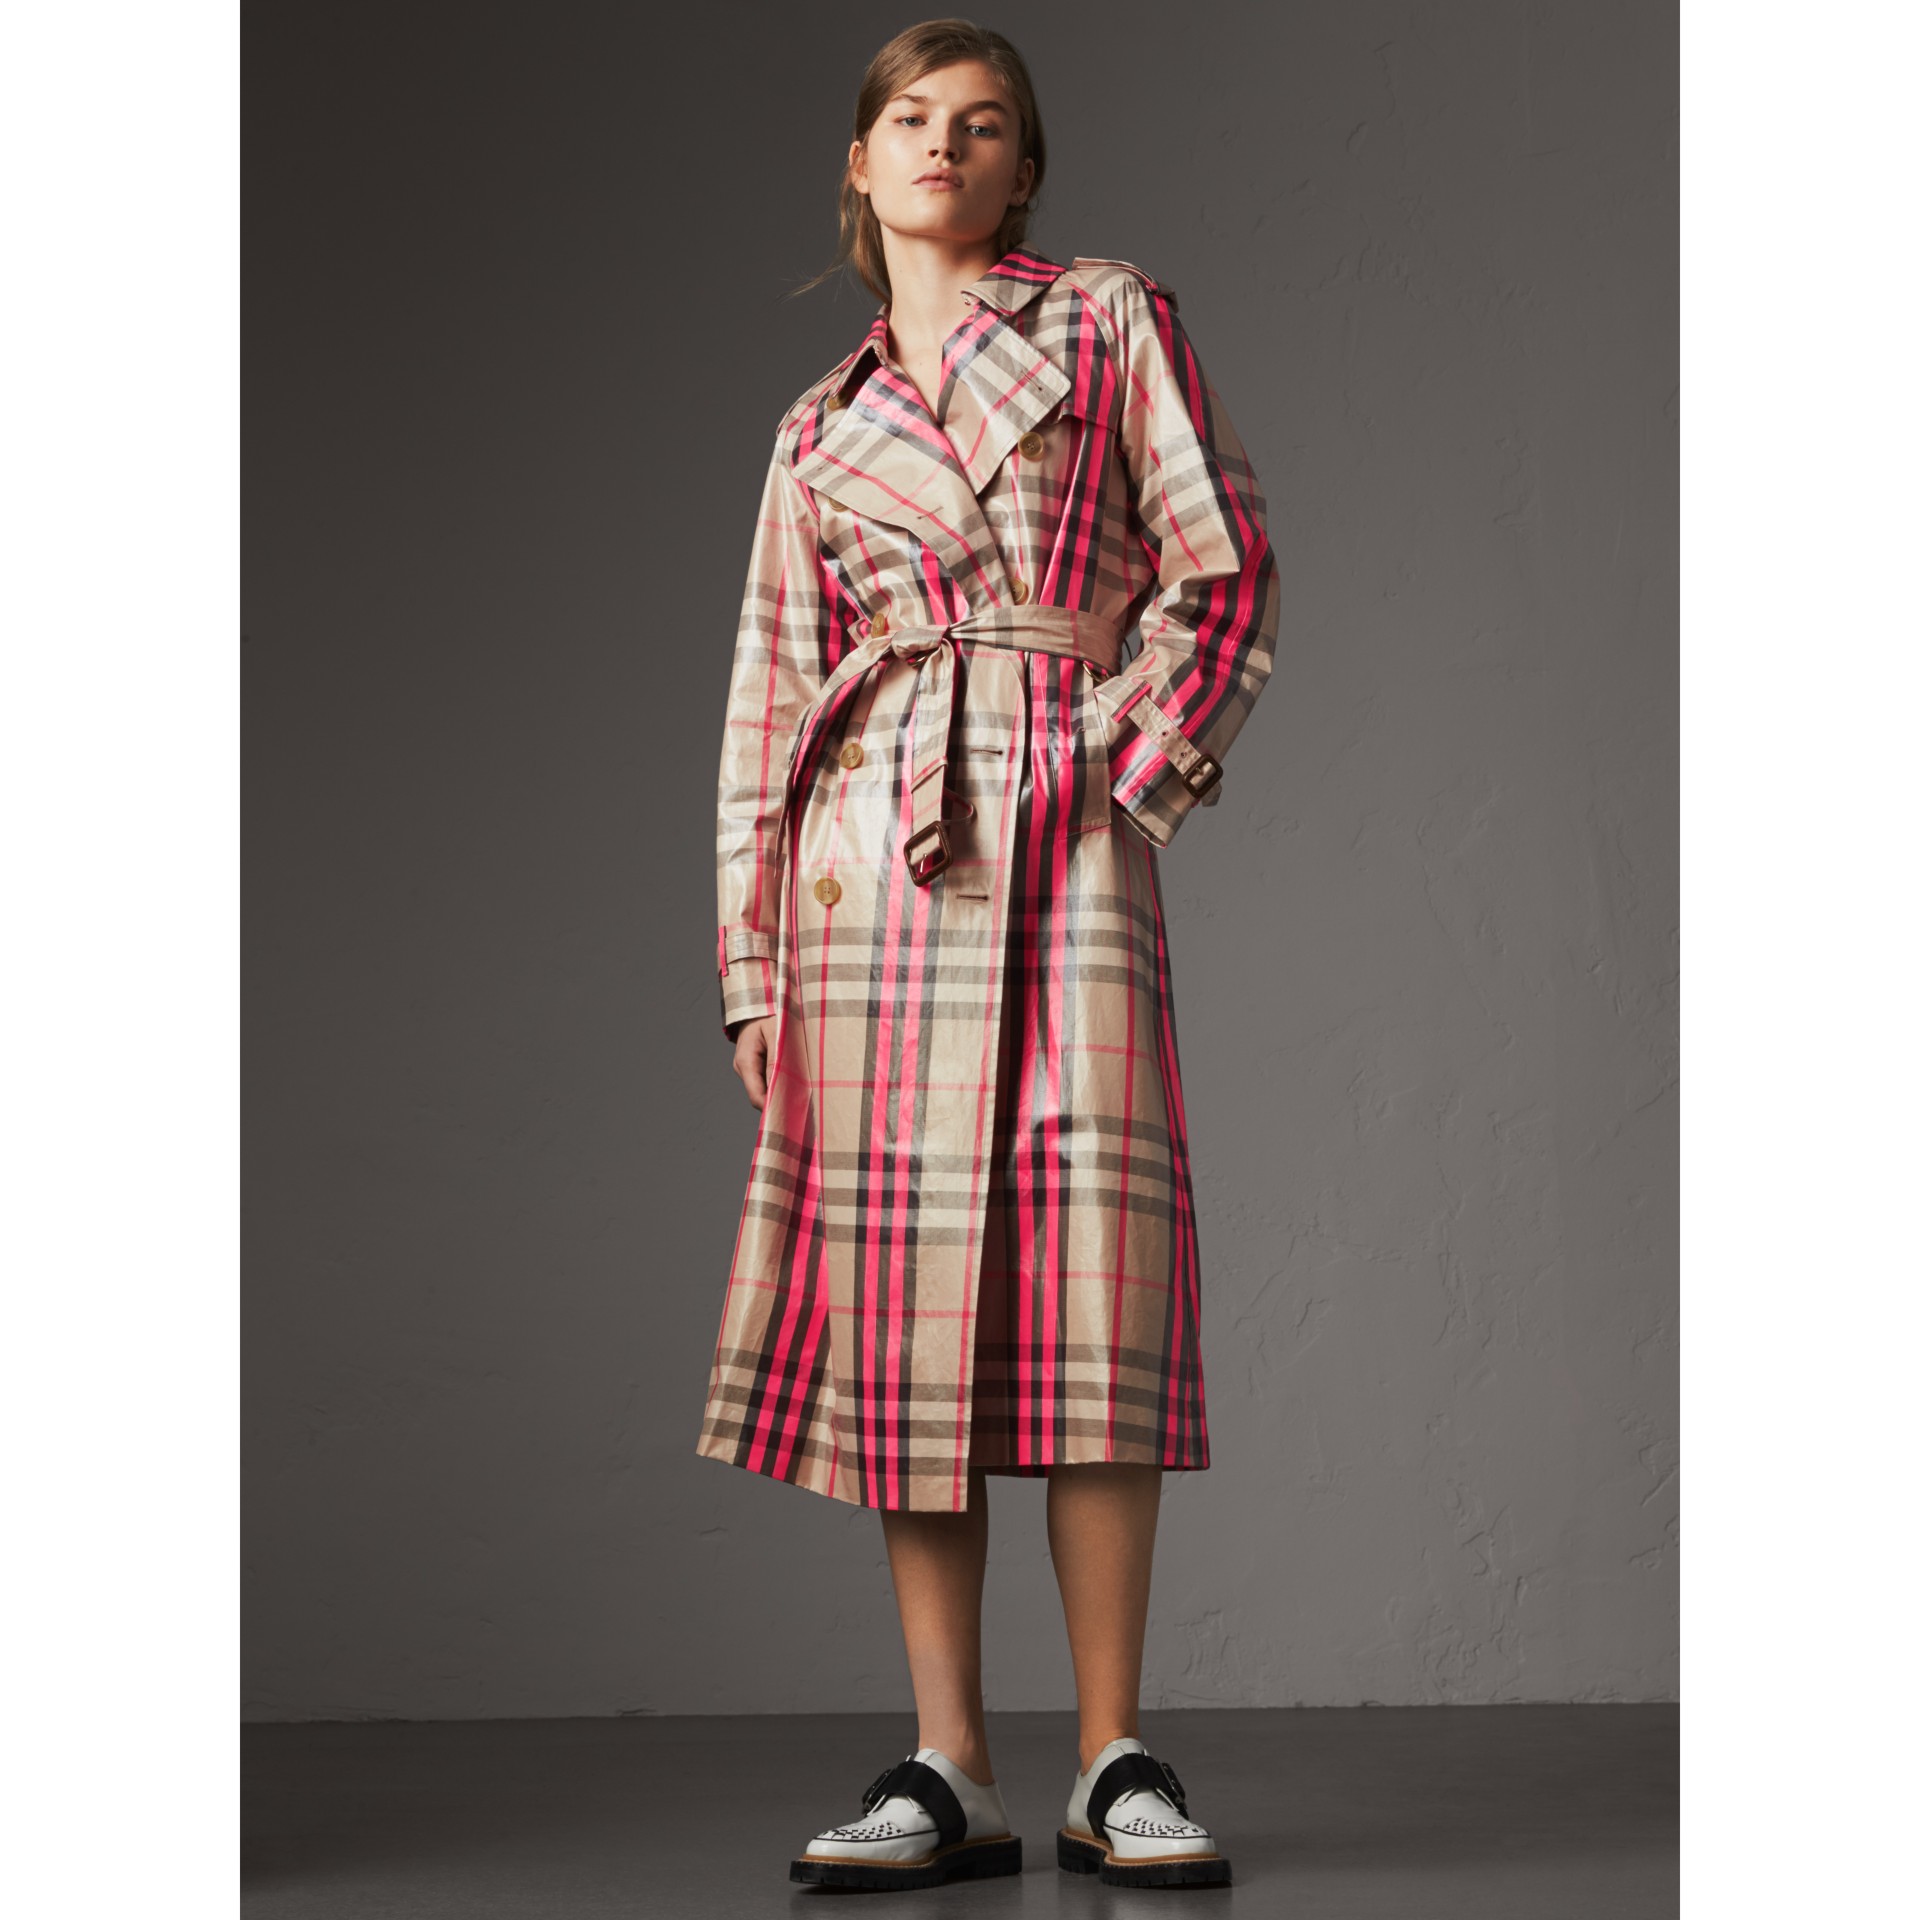 Laminated Check Trench Coat in Neon Pink - Women | Burberry United States